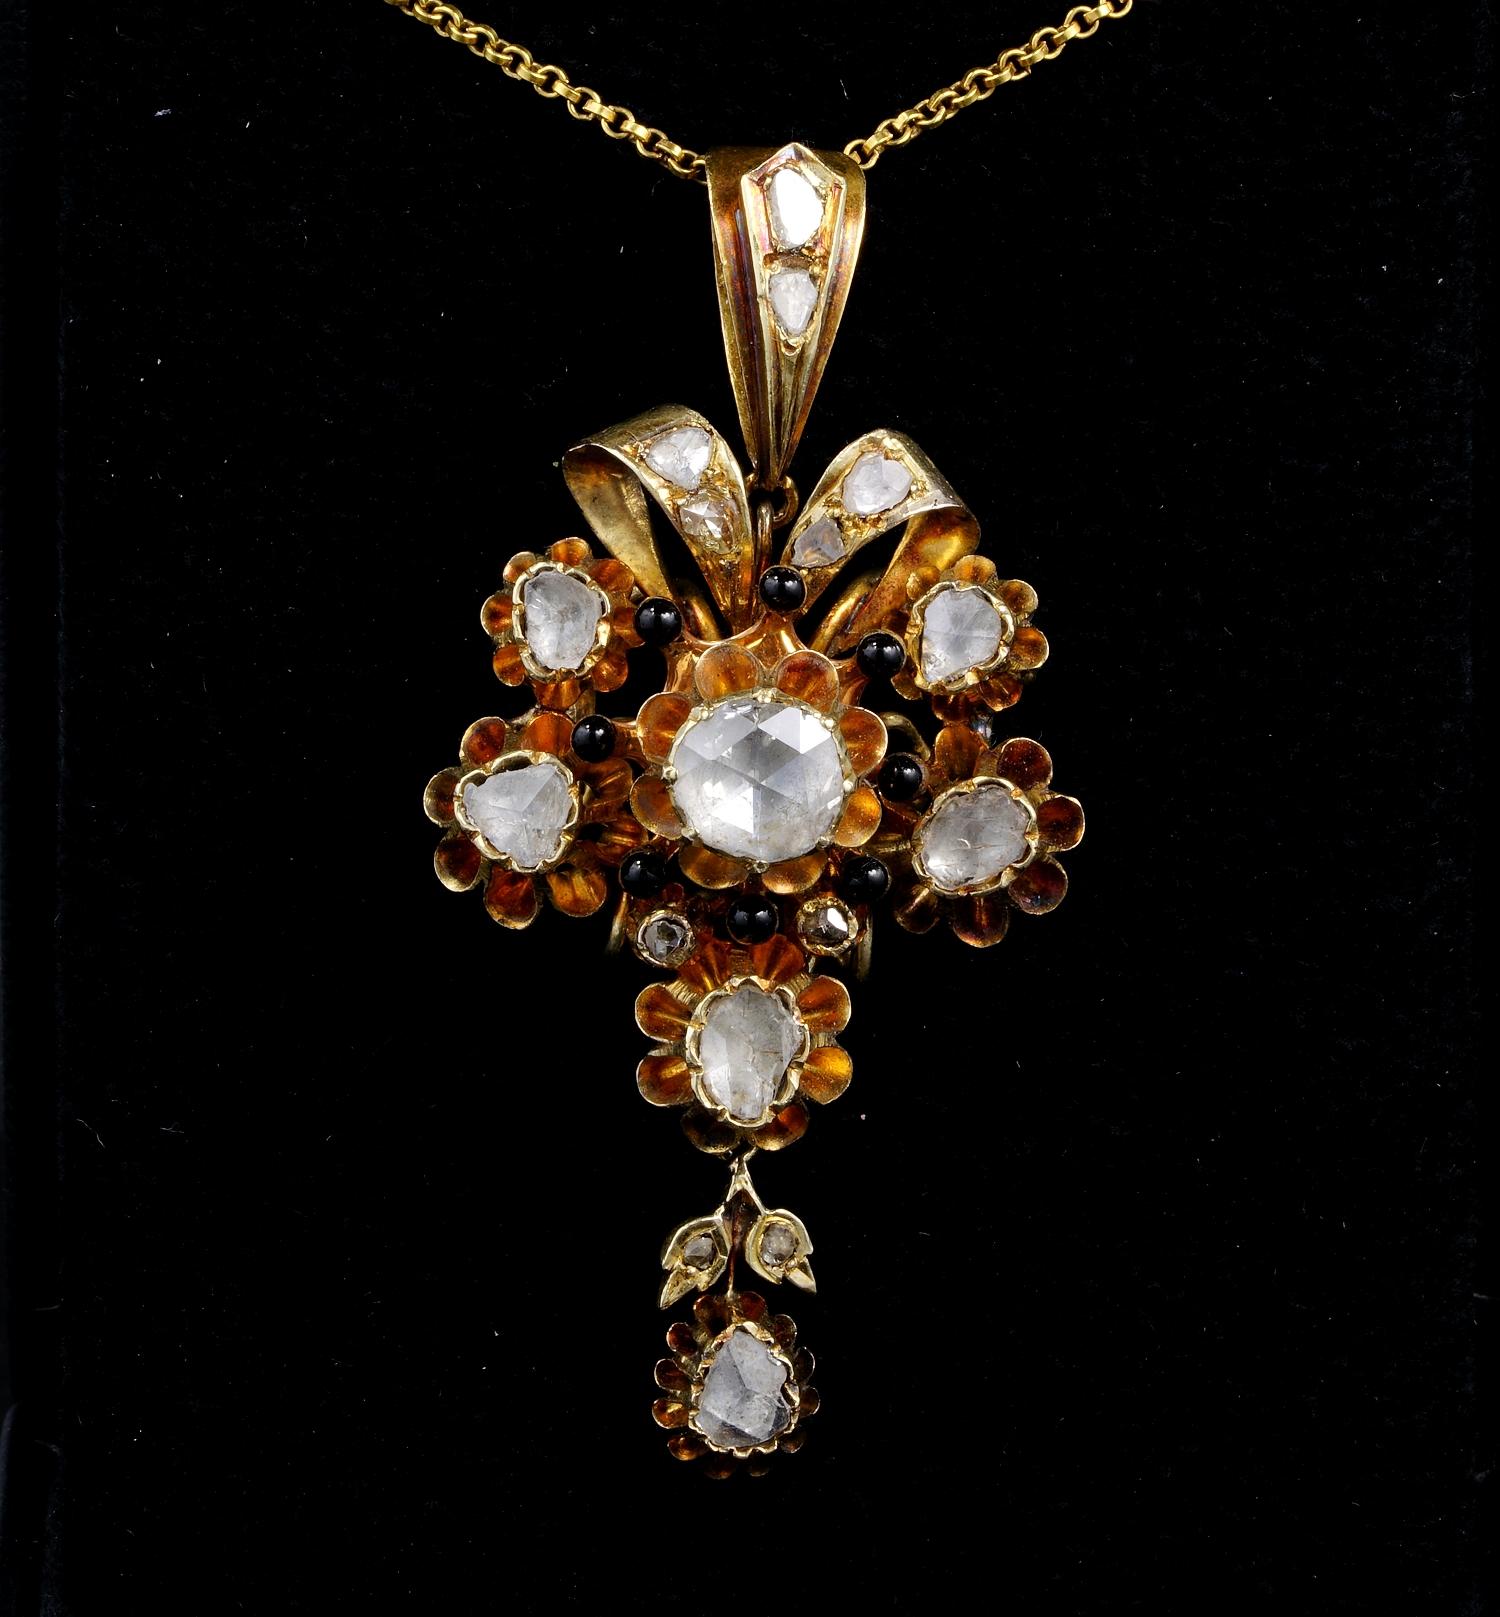 Through the ages

Amazing Georgian era large flower shaped Diamond pendant, can be used bypassing it through a black velvet or silk ribbon, or as pendant by its dedicated bail, which can completely separate from it
Breath taking workmanship of the